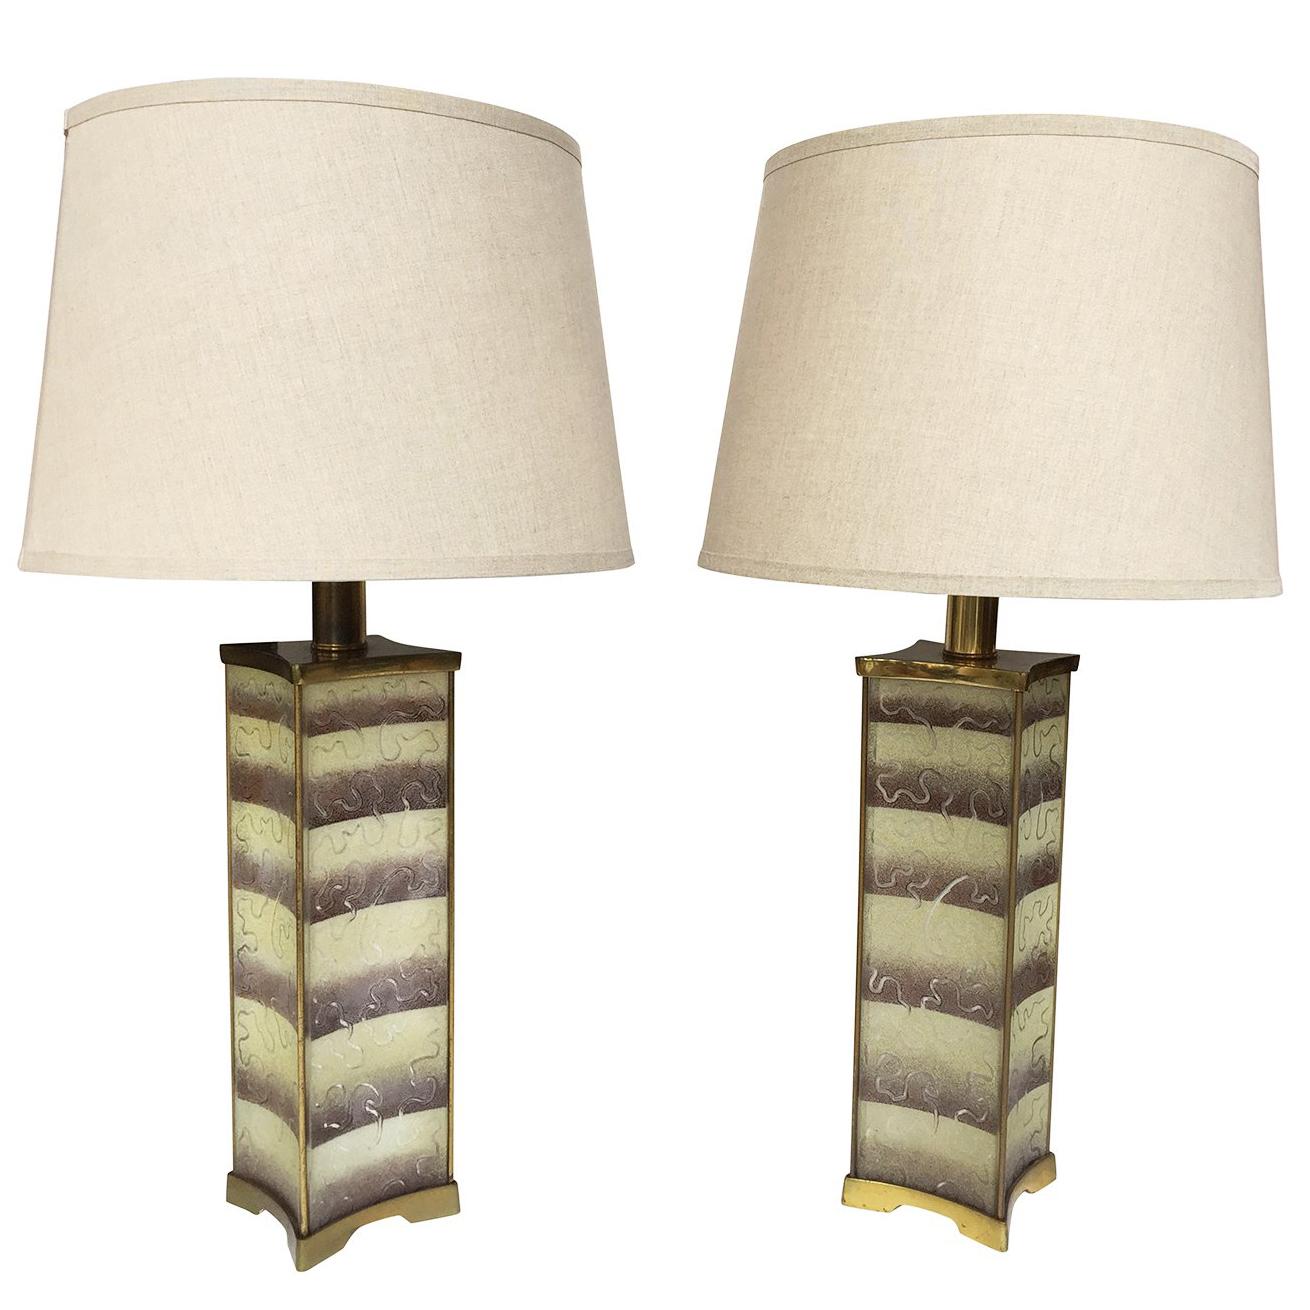 1940s Pair of Lightolier Frosted Glass Table Lamps in the Style of James Mont